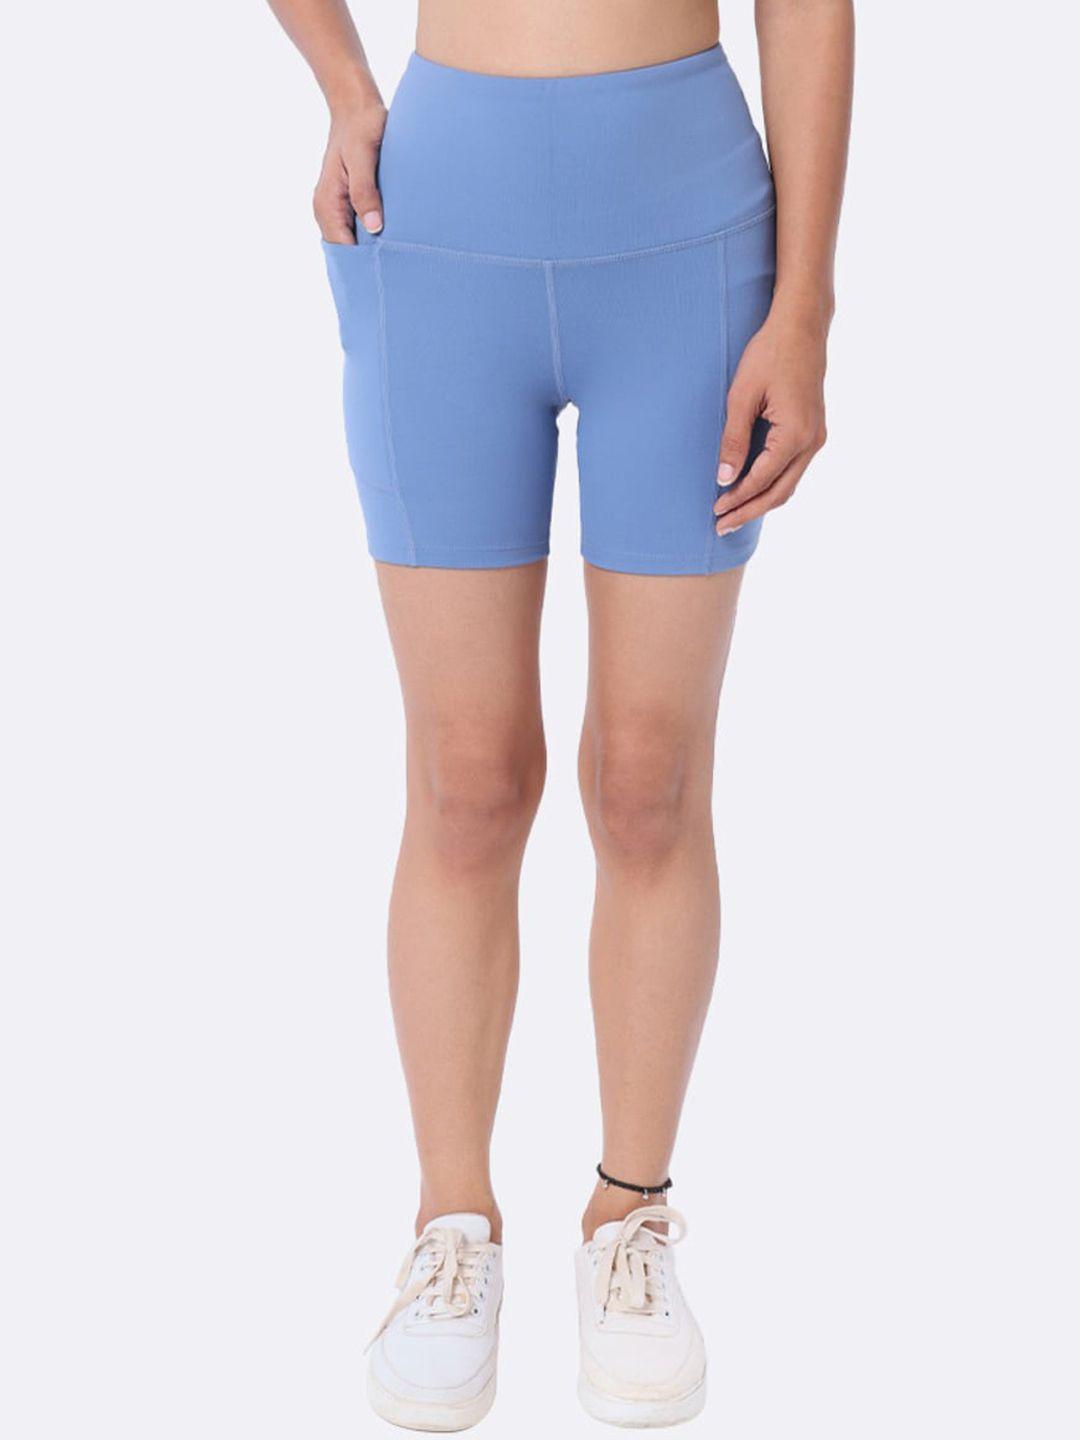 blissclub women bloom blue high waist the ultimate shorts with 2 pockets